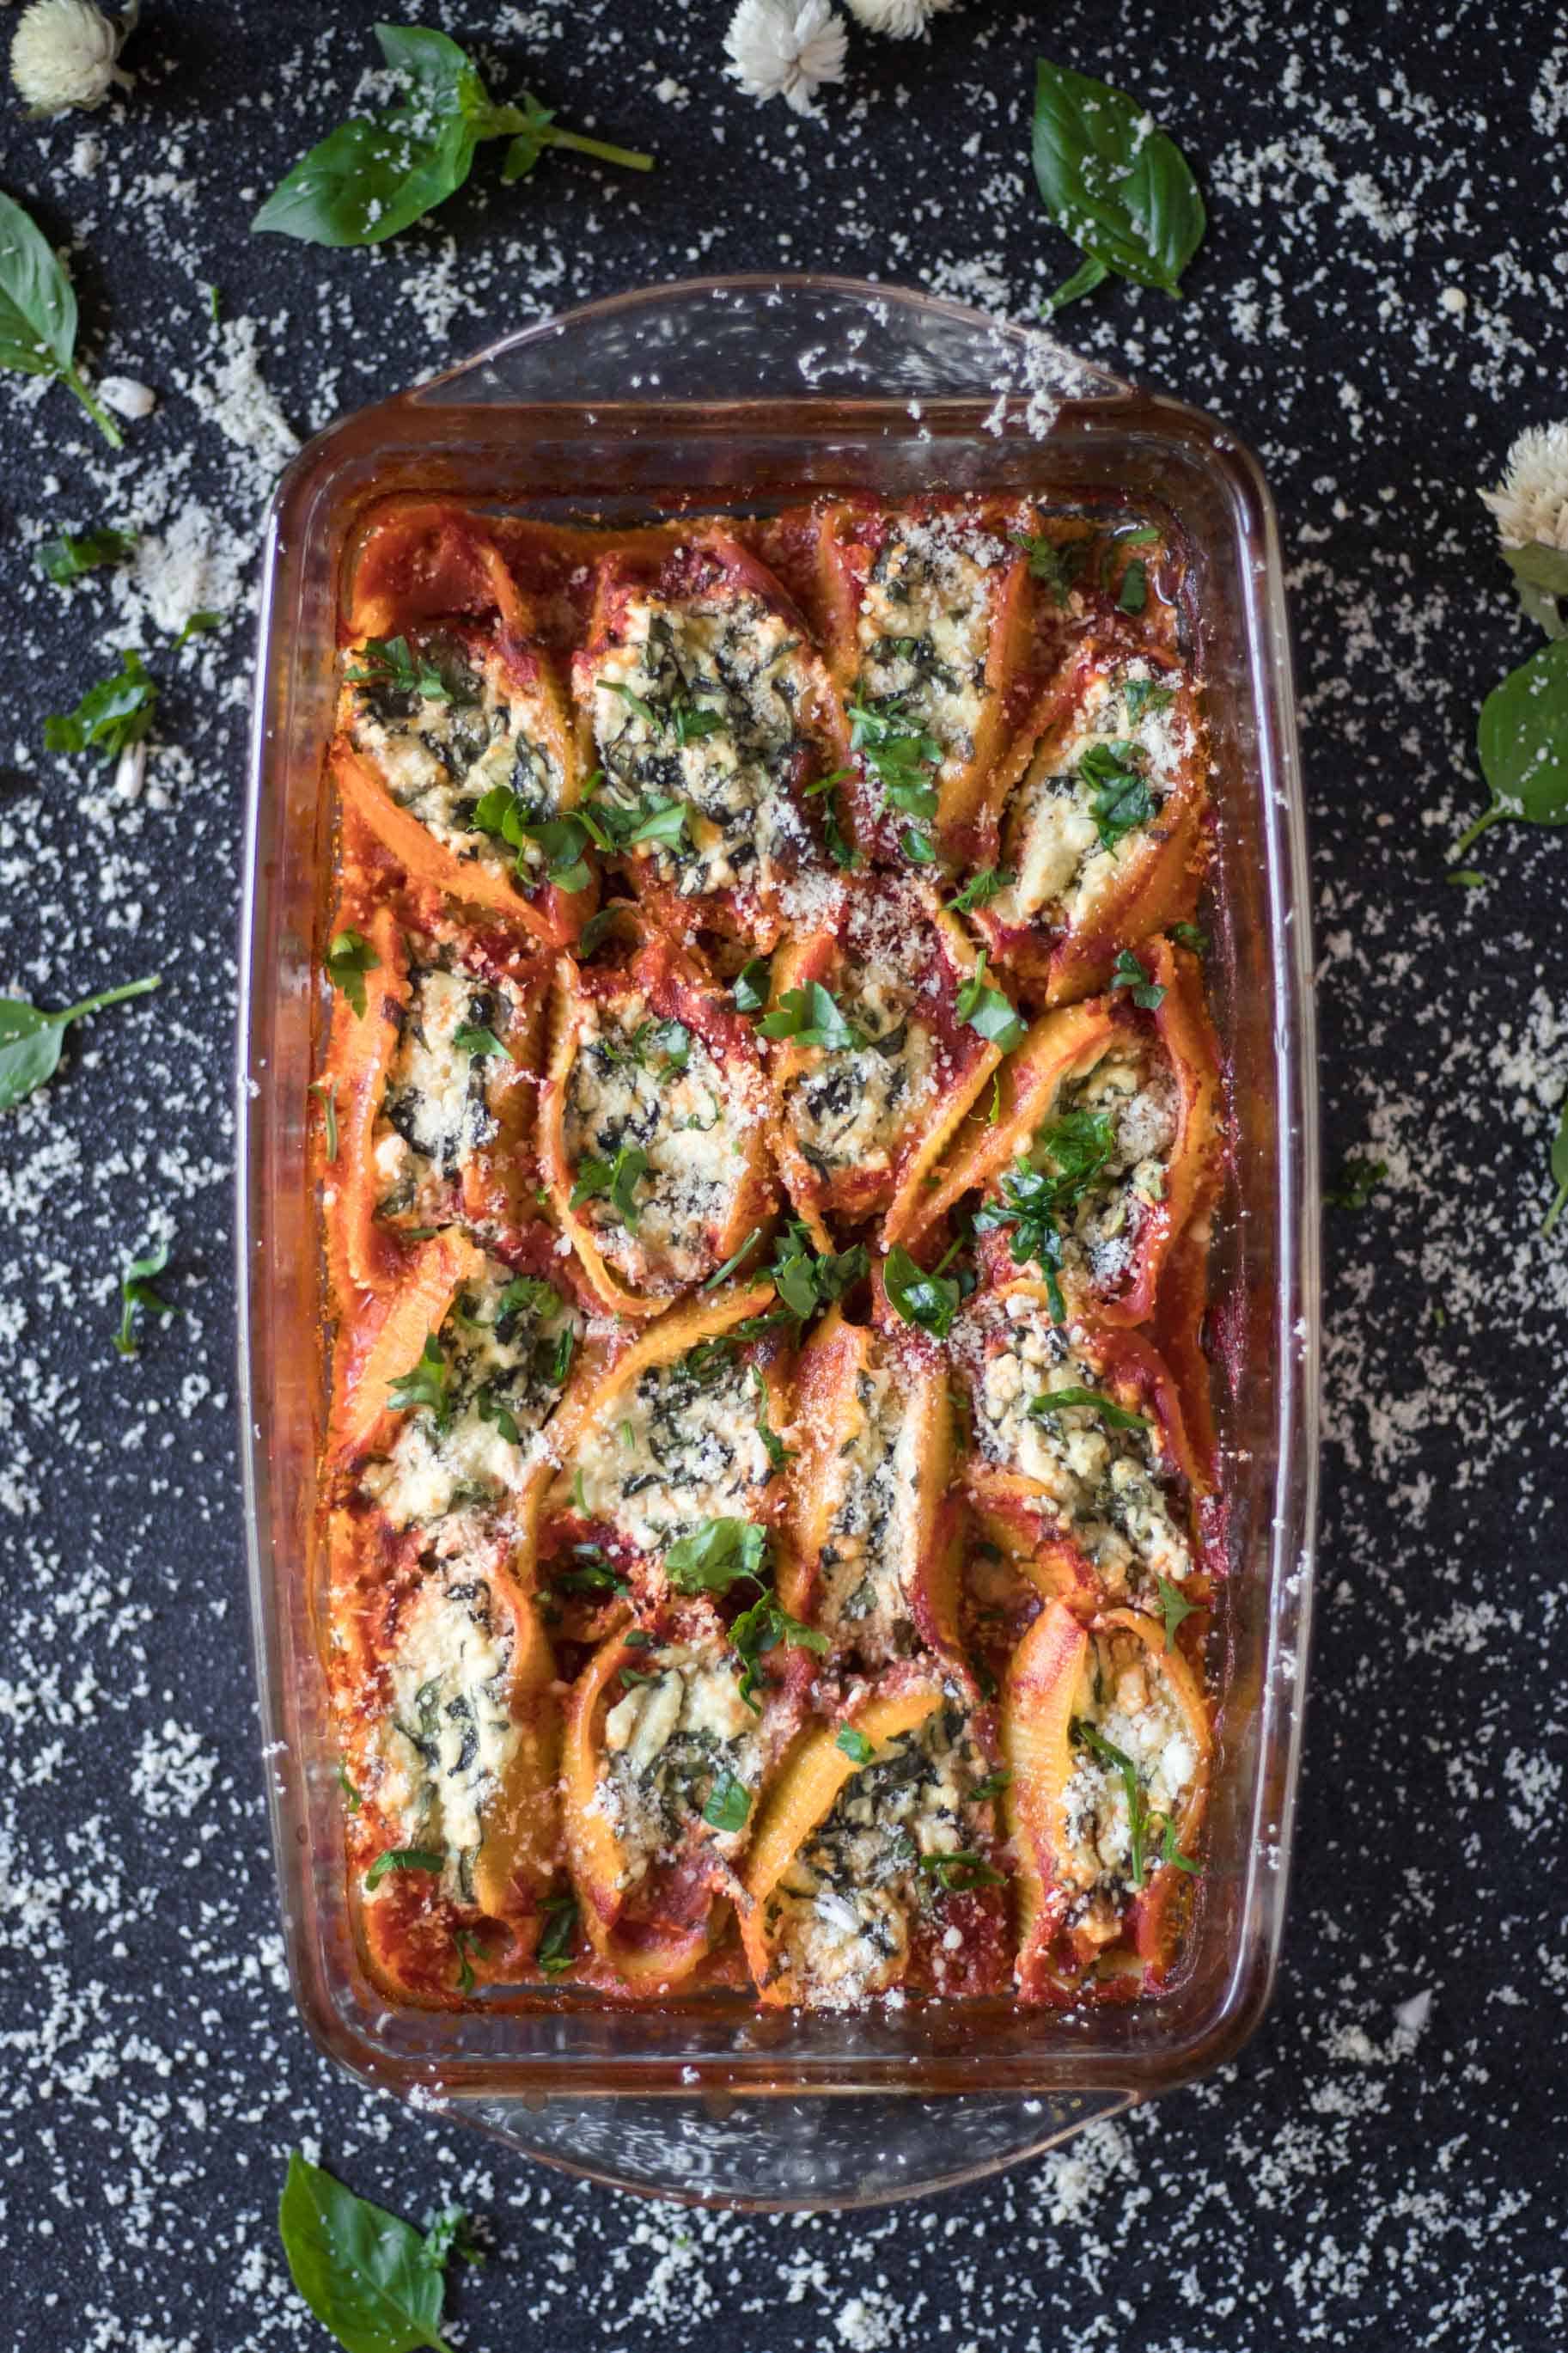 These Low FODMAP Ricotta and Spinach Pasta Shells are light yet filling, super flavorful, healthy and easy to digest. Plus super simple to make!